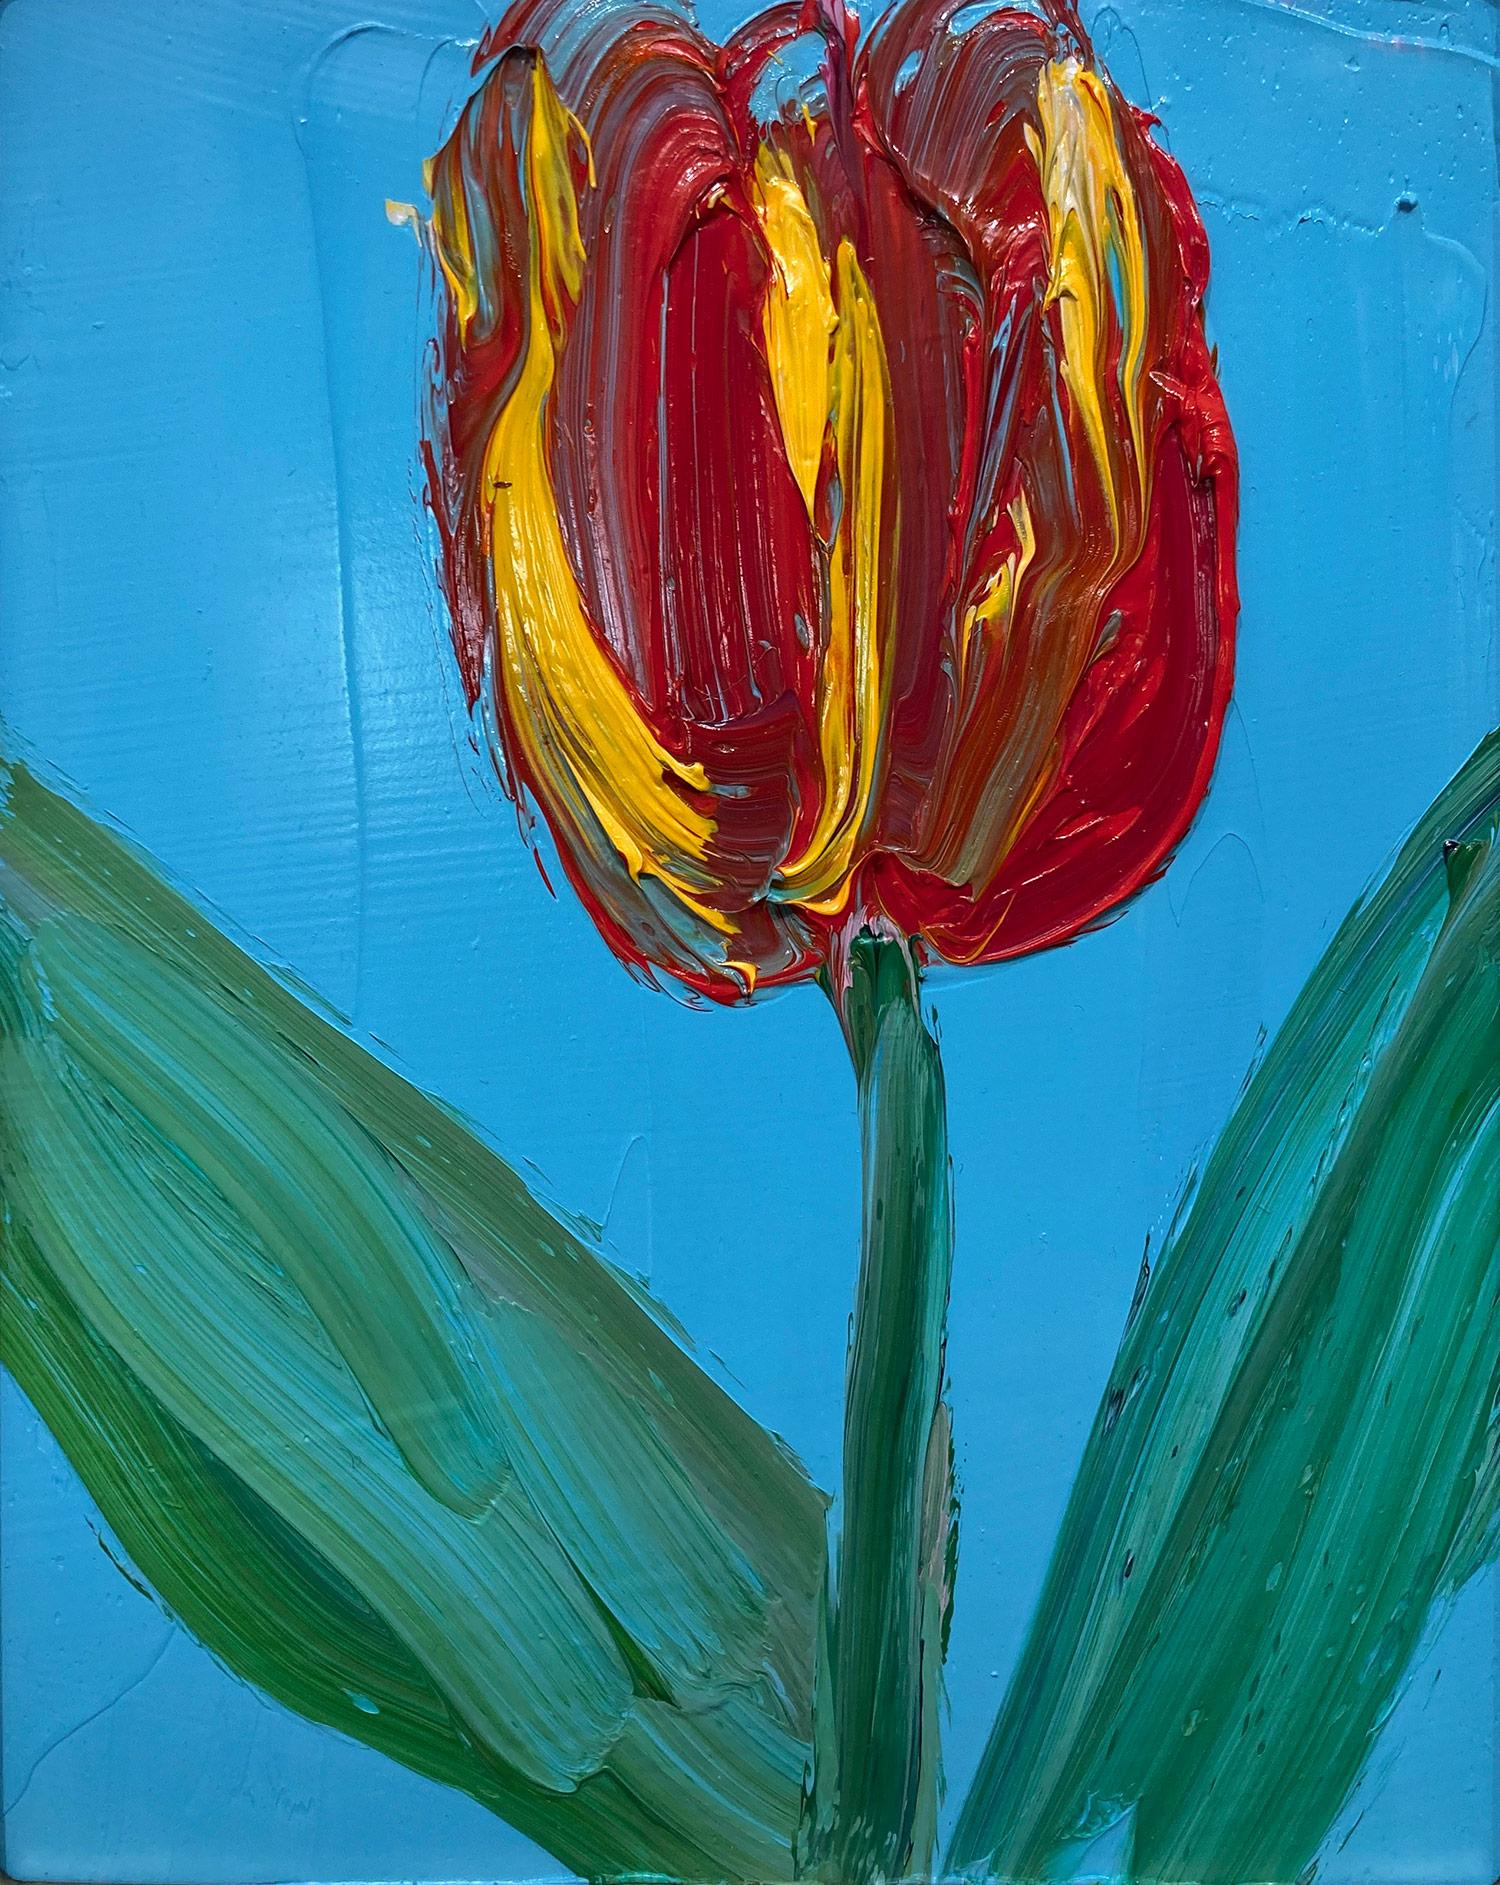 A wonderful composition of one of Slonem's newest series, Tulips. This piece depicts gestural figure of a red and yellow Tulip on a cerulean blue background with thick use of paint. Inspired by nature and a genuine love for animals, Slonem's